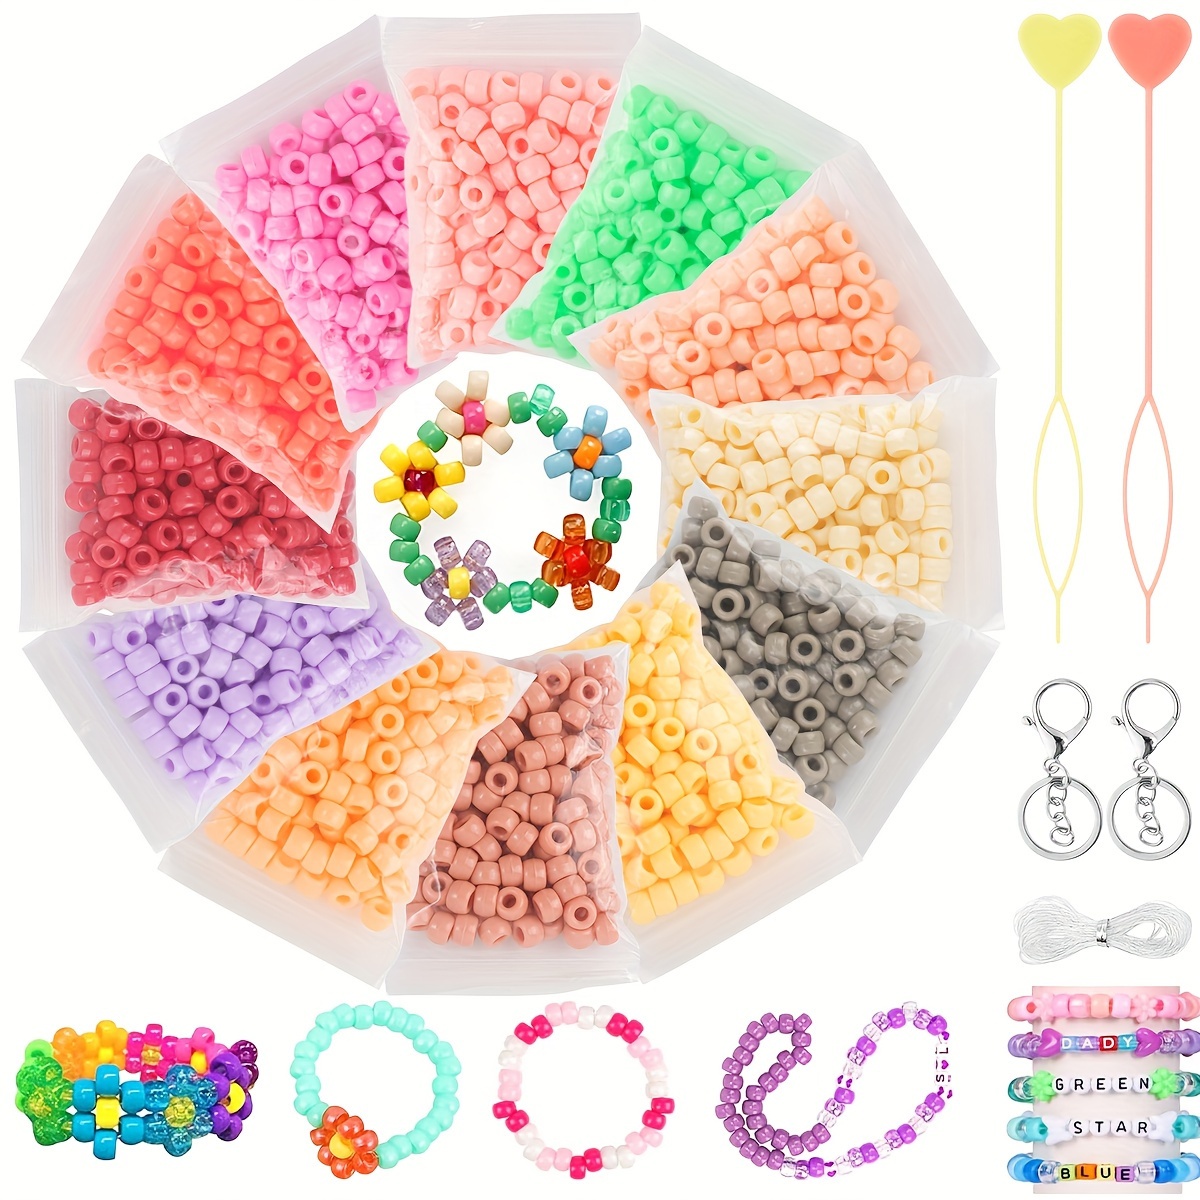 1200pcs Pony Beads Set, 12 Colors, Rainbow Colored Beads For DIY Jewelry  Making, Hair Beads Elastic Thread Key Chain Jewelry Making Kit, Holiday  Birth